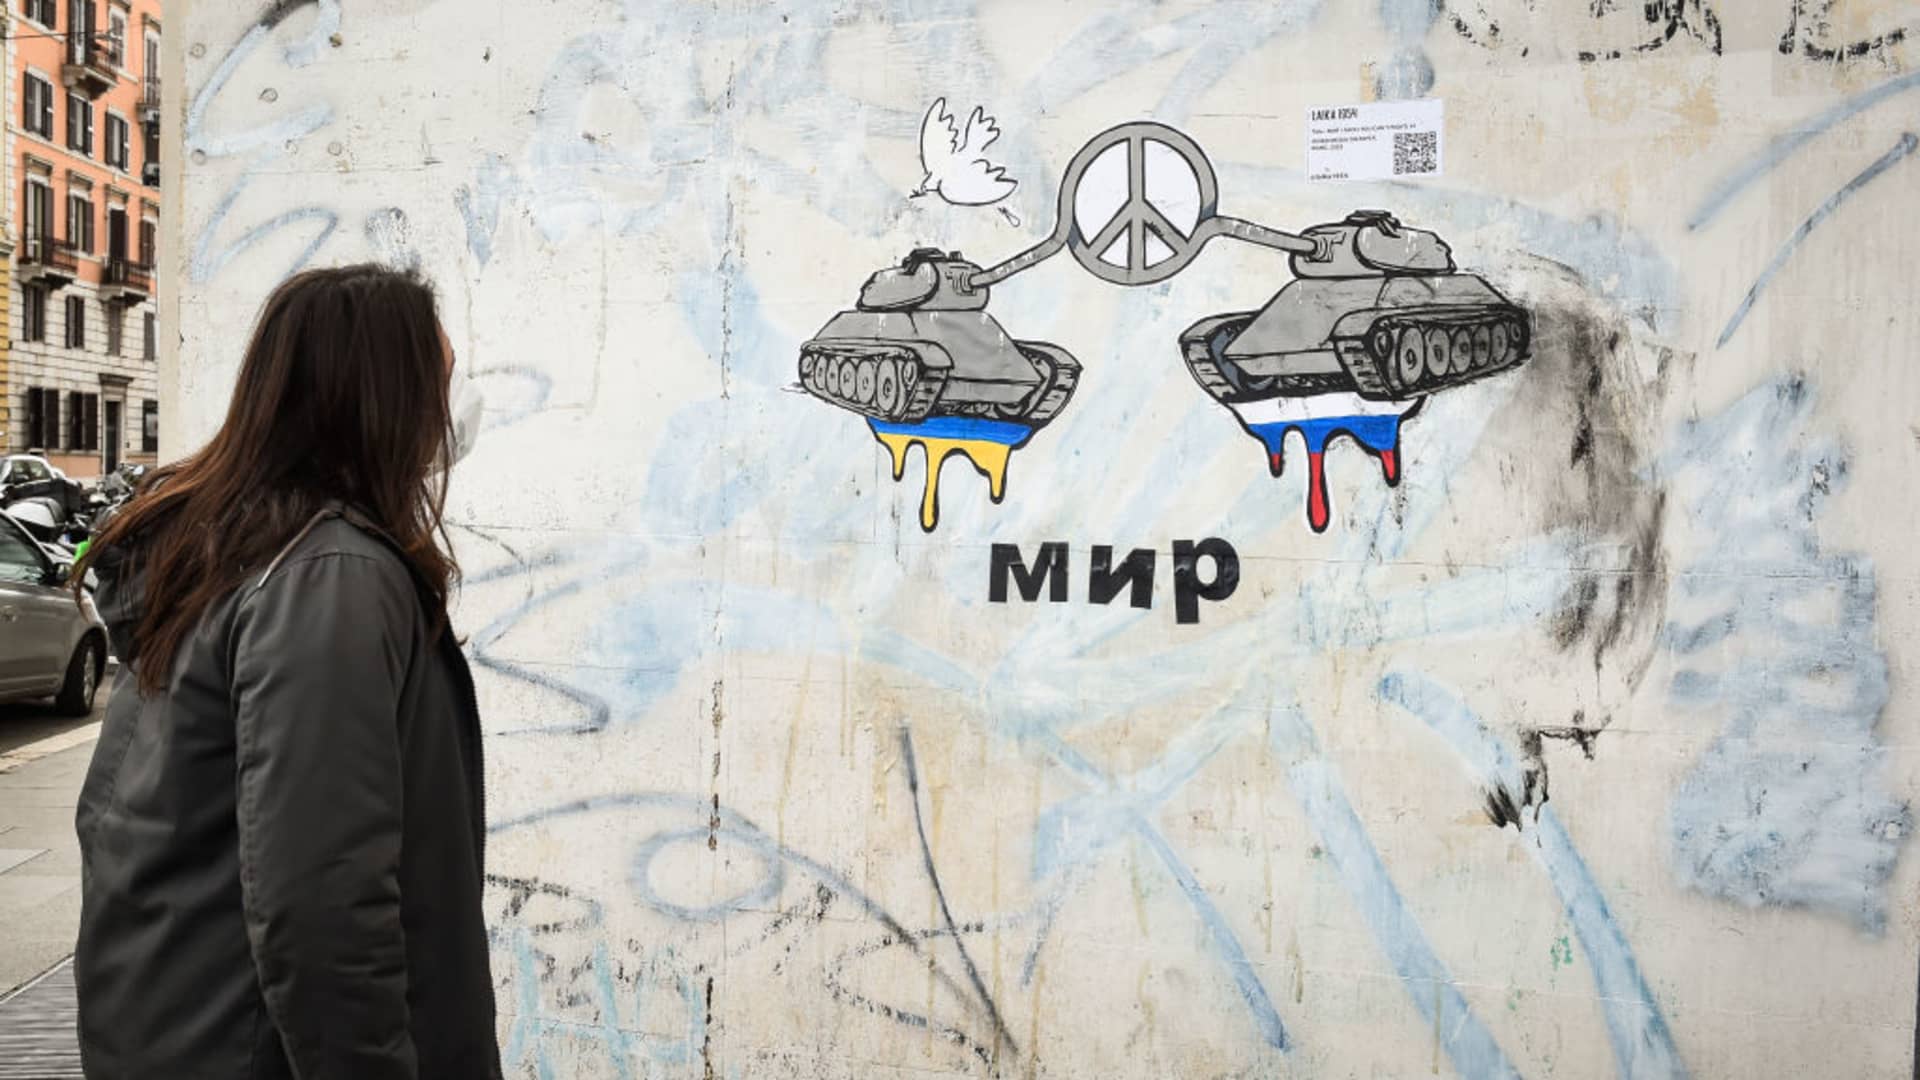 Peace. The new mural by street artist Laika dedicated to the crisis between Russia and Ukraine.